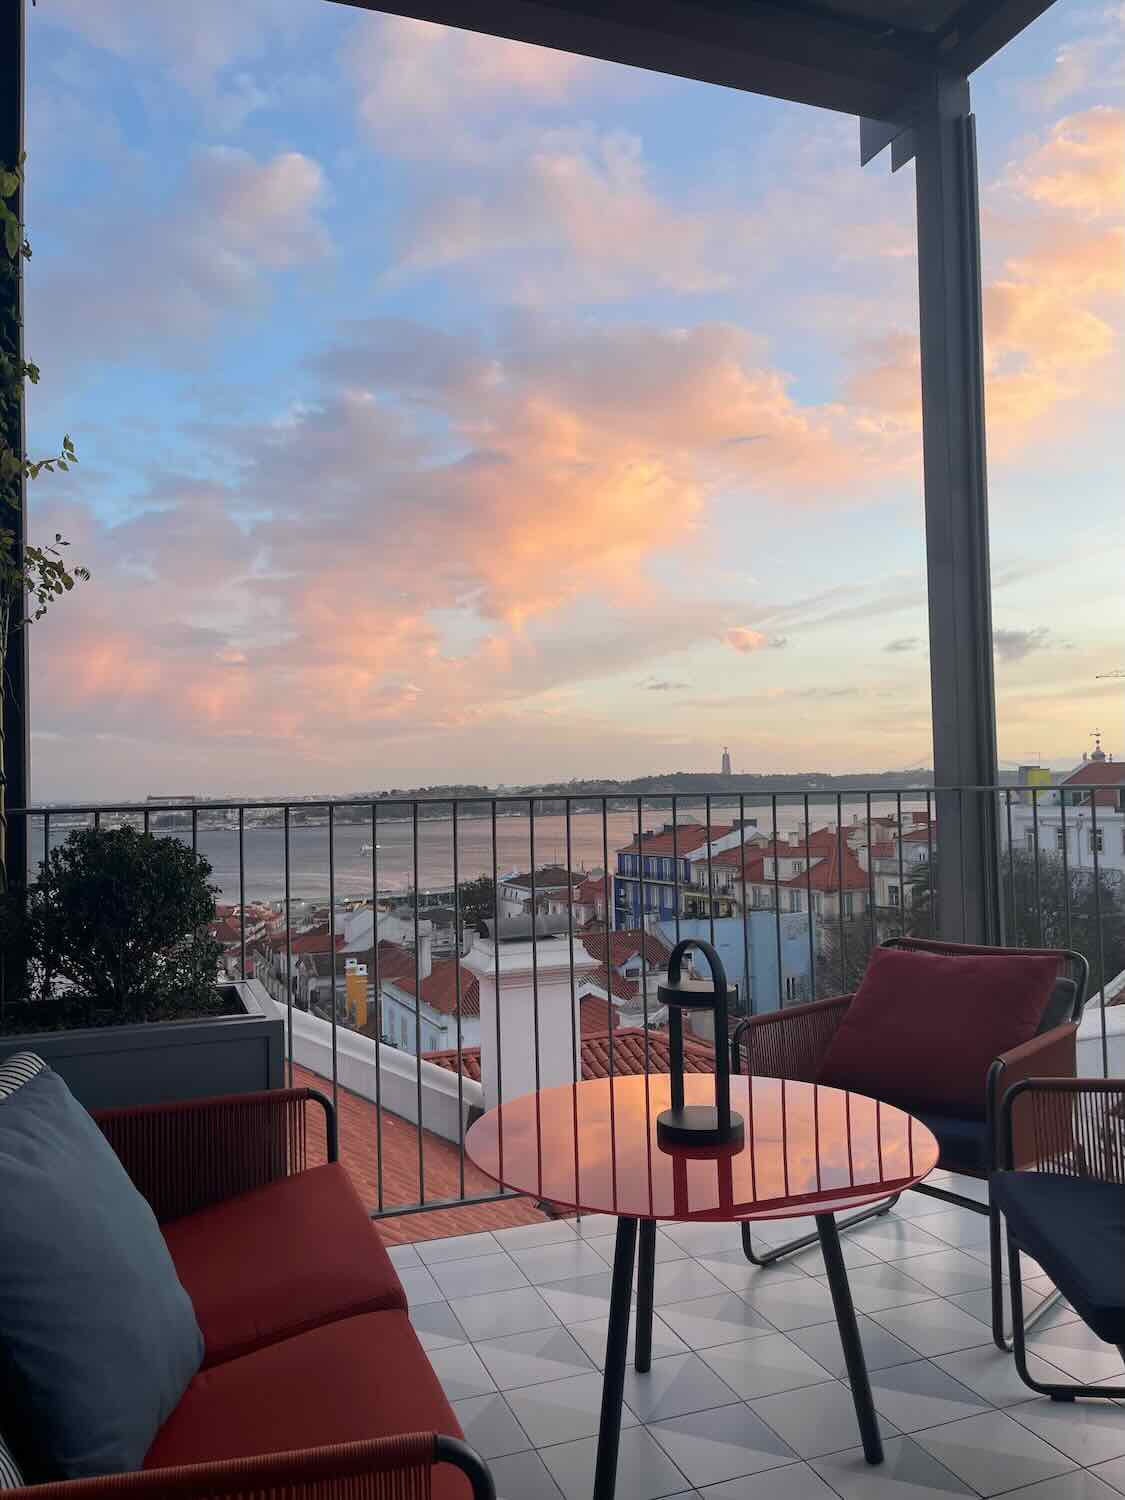 A tranquil rooftop setting in Lisbon at sunset with plush red seating, overlooking a picturesque view of the city under a pastel sky.